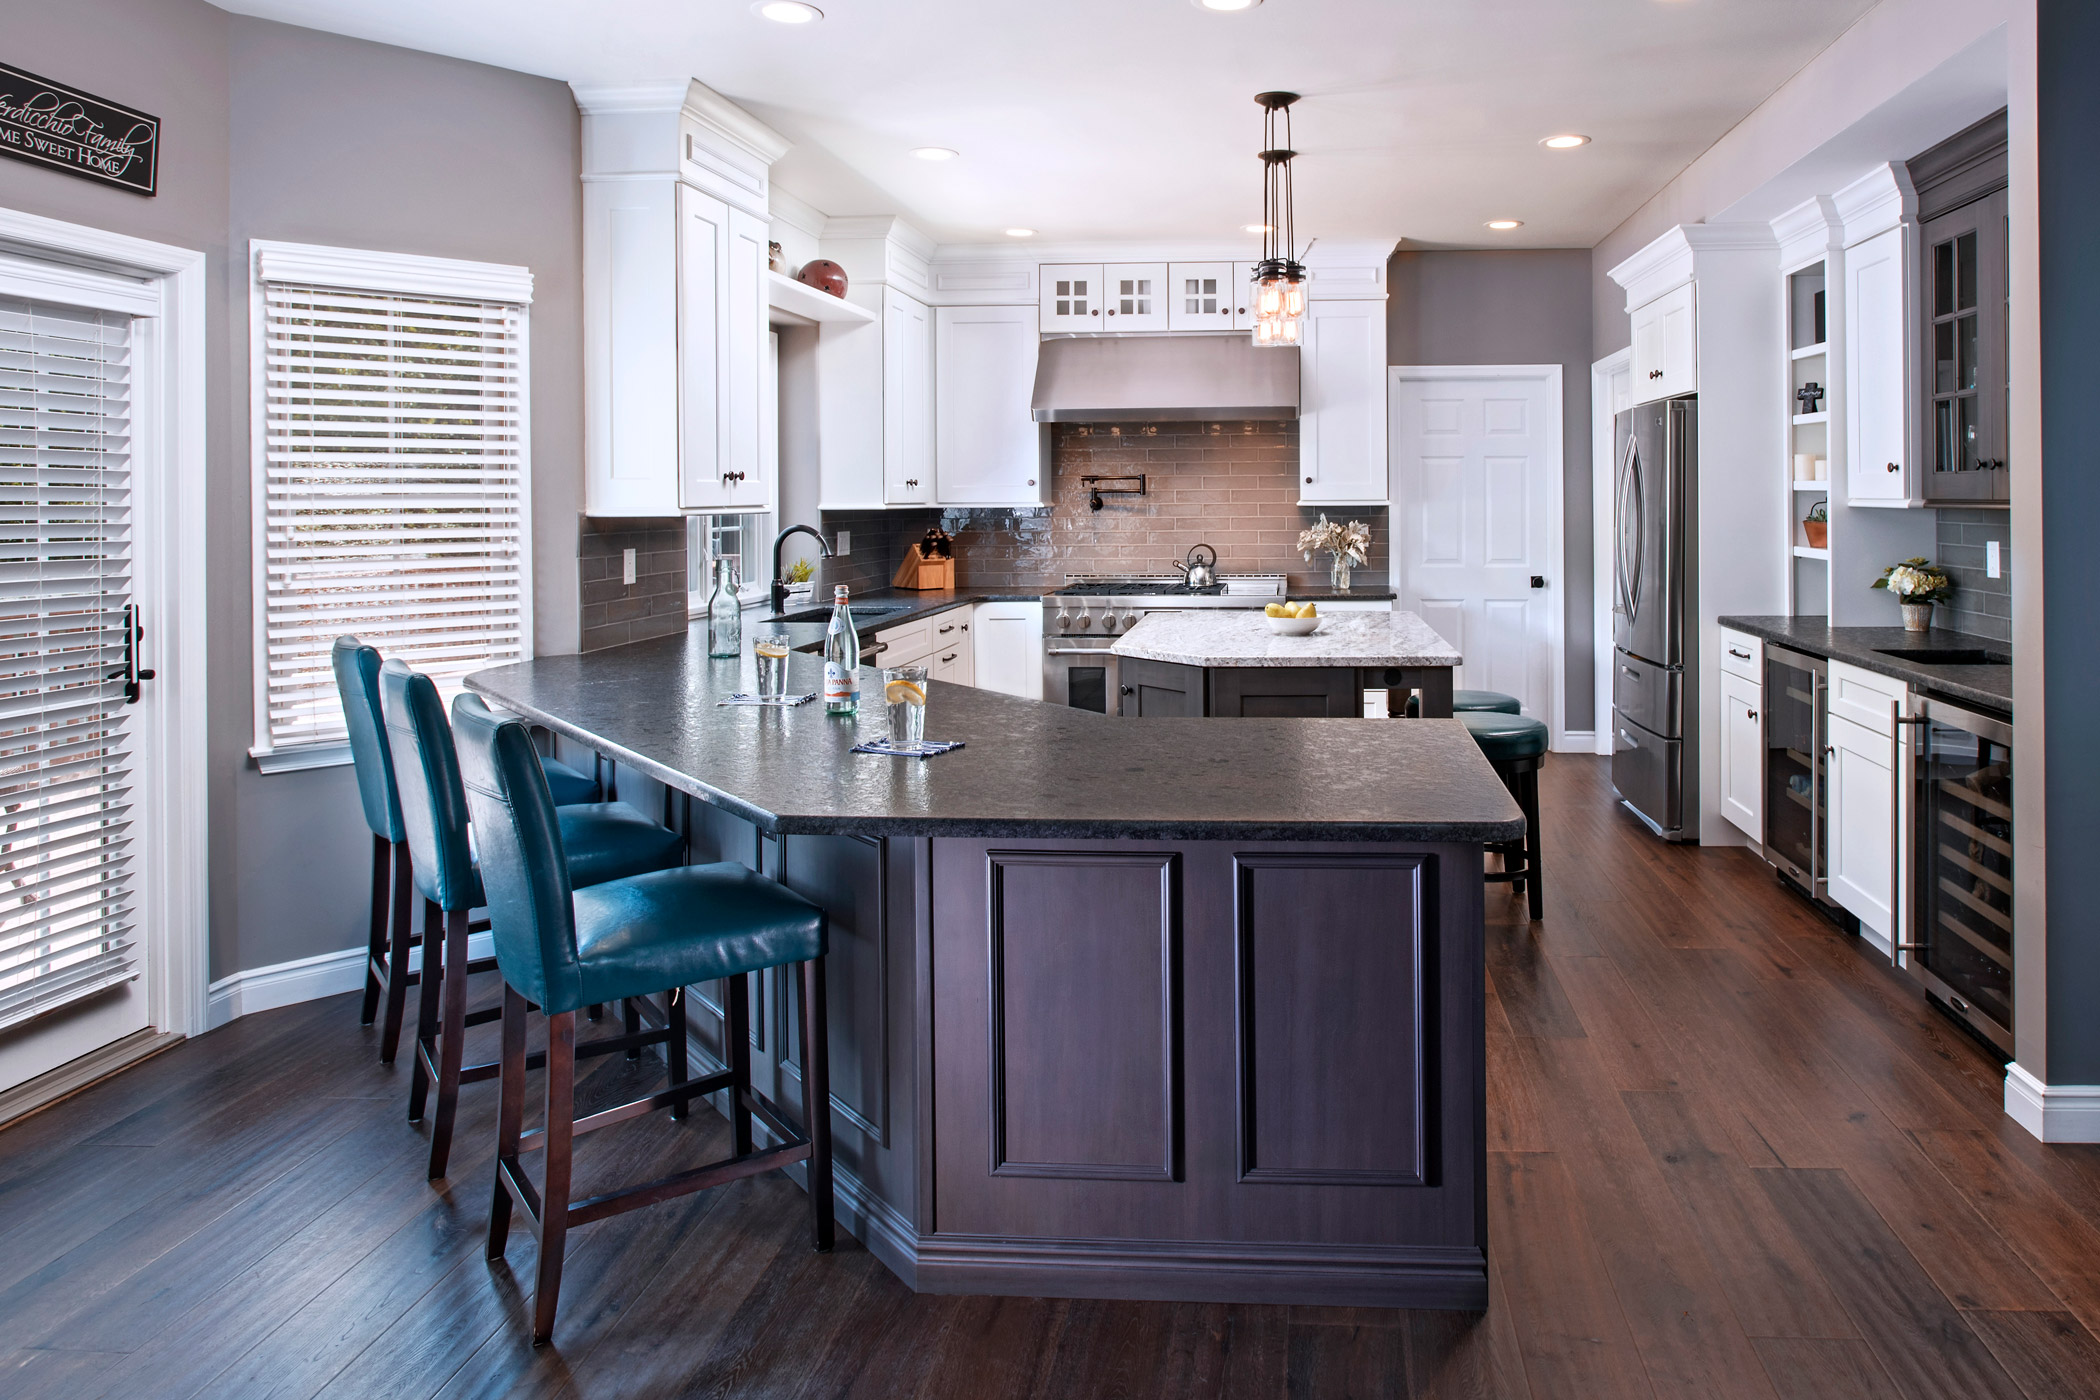 Furniture-Grade Kitchen Cabinets, R.D. Henry & Co. Line, Custom Sizes,  Kitchen Remodel, Highly Crafted Cabinet Doors, Beautiful Cabinetry, RD  Henry Evoke, Customized Paint Match, Specific Hue, Artisanal Glaze, Door,  Furniture-Grade Kitchen Cabinets